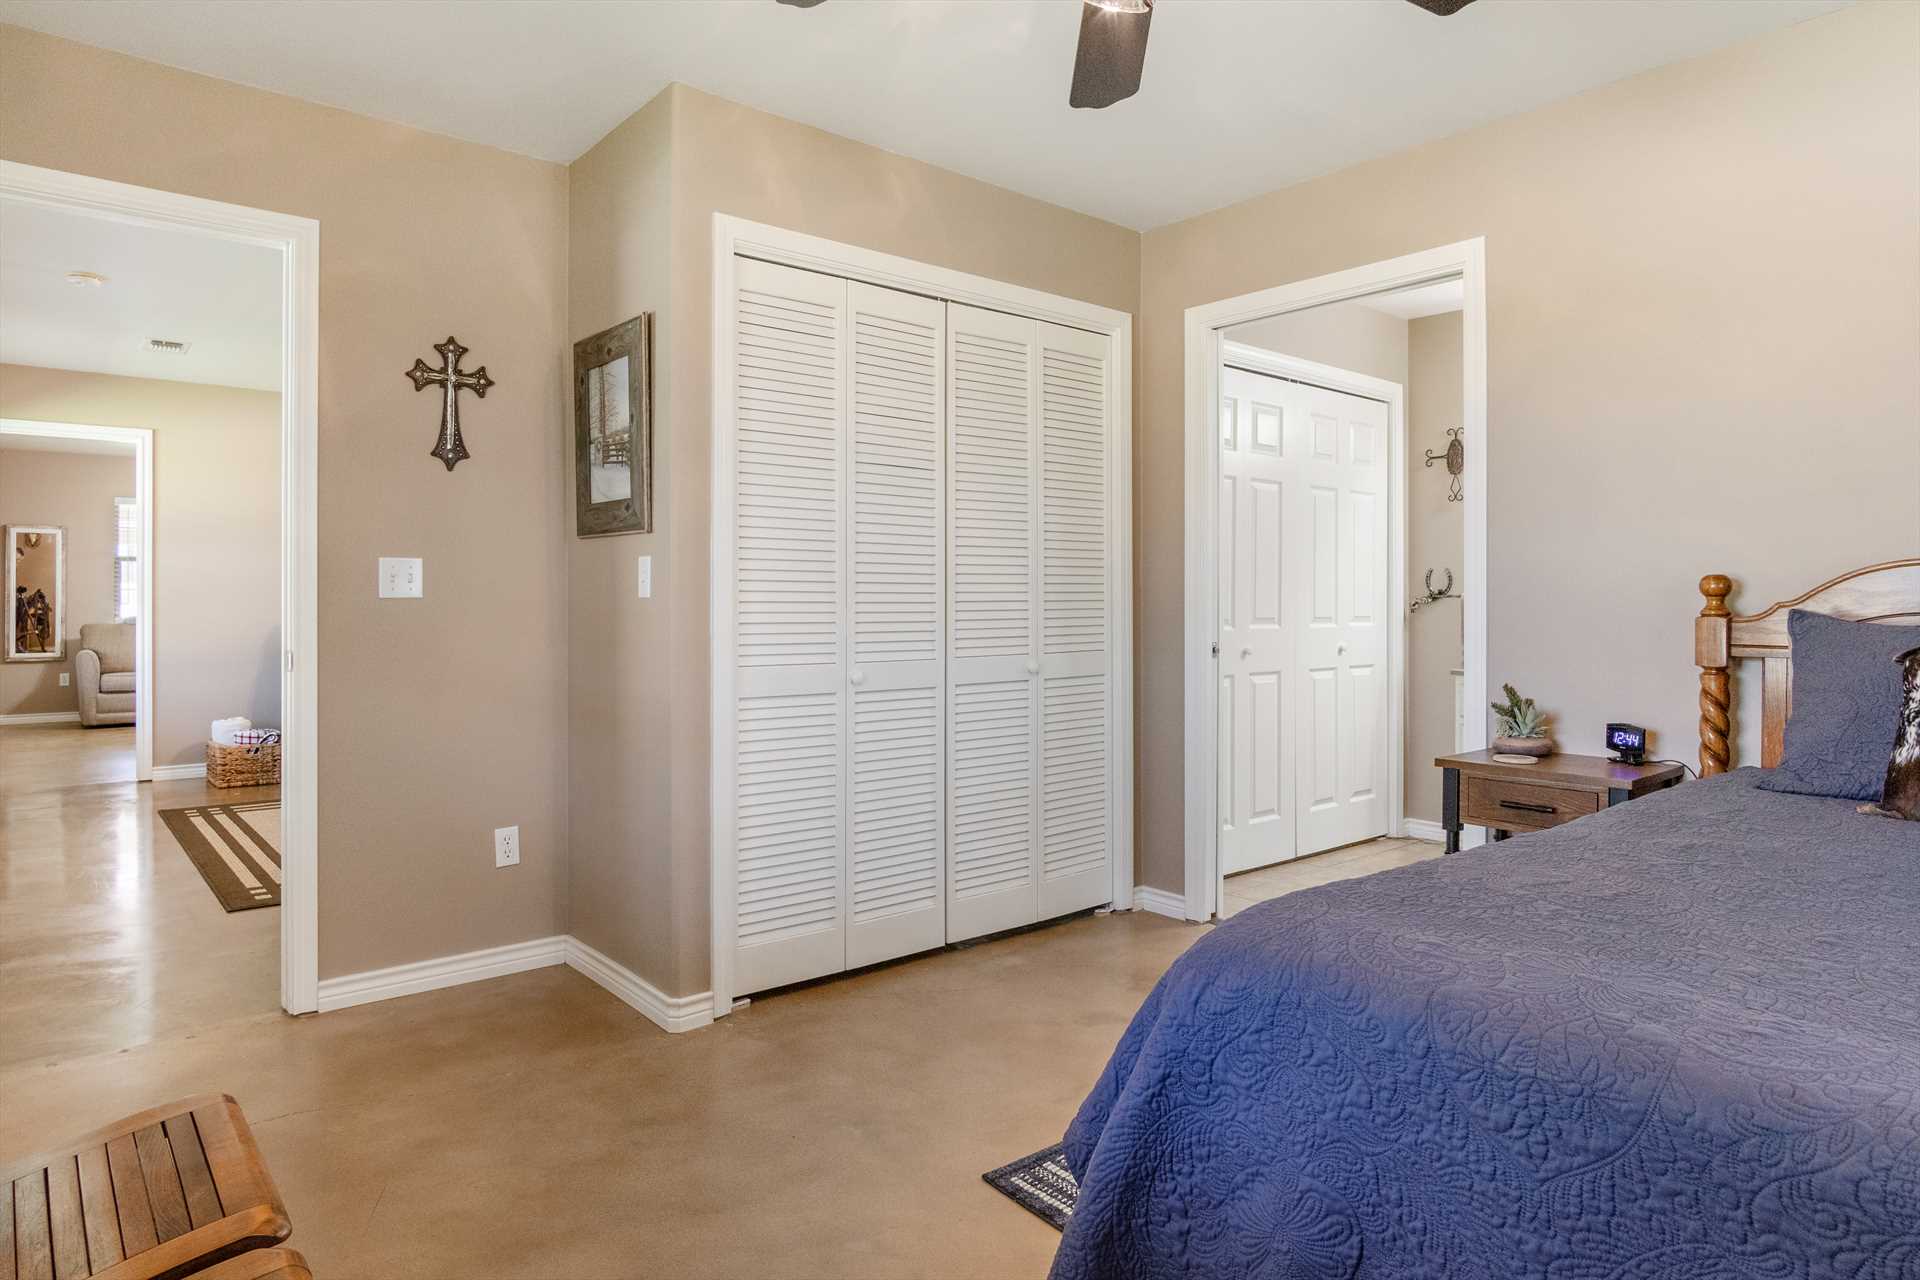                                                 The bedrooms here include storage space, too, so don't be a stranger! Kick back and stay a while.